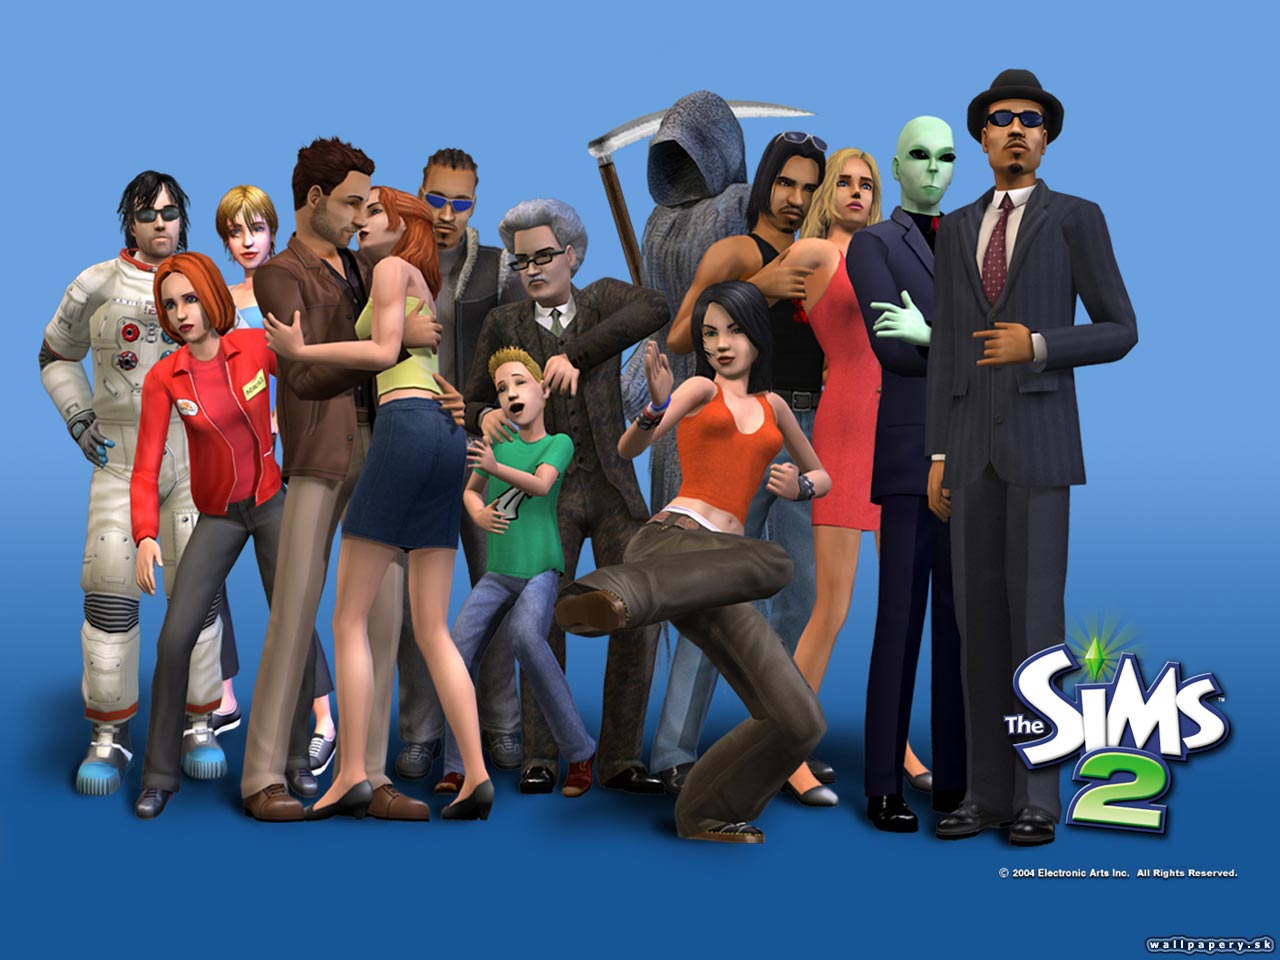 The Sims 2 - wallpaper 15